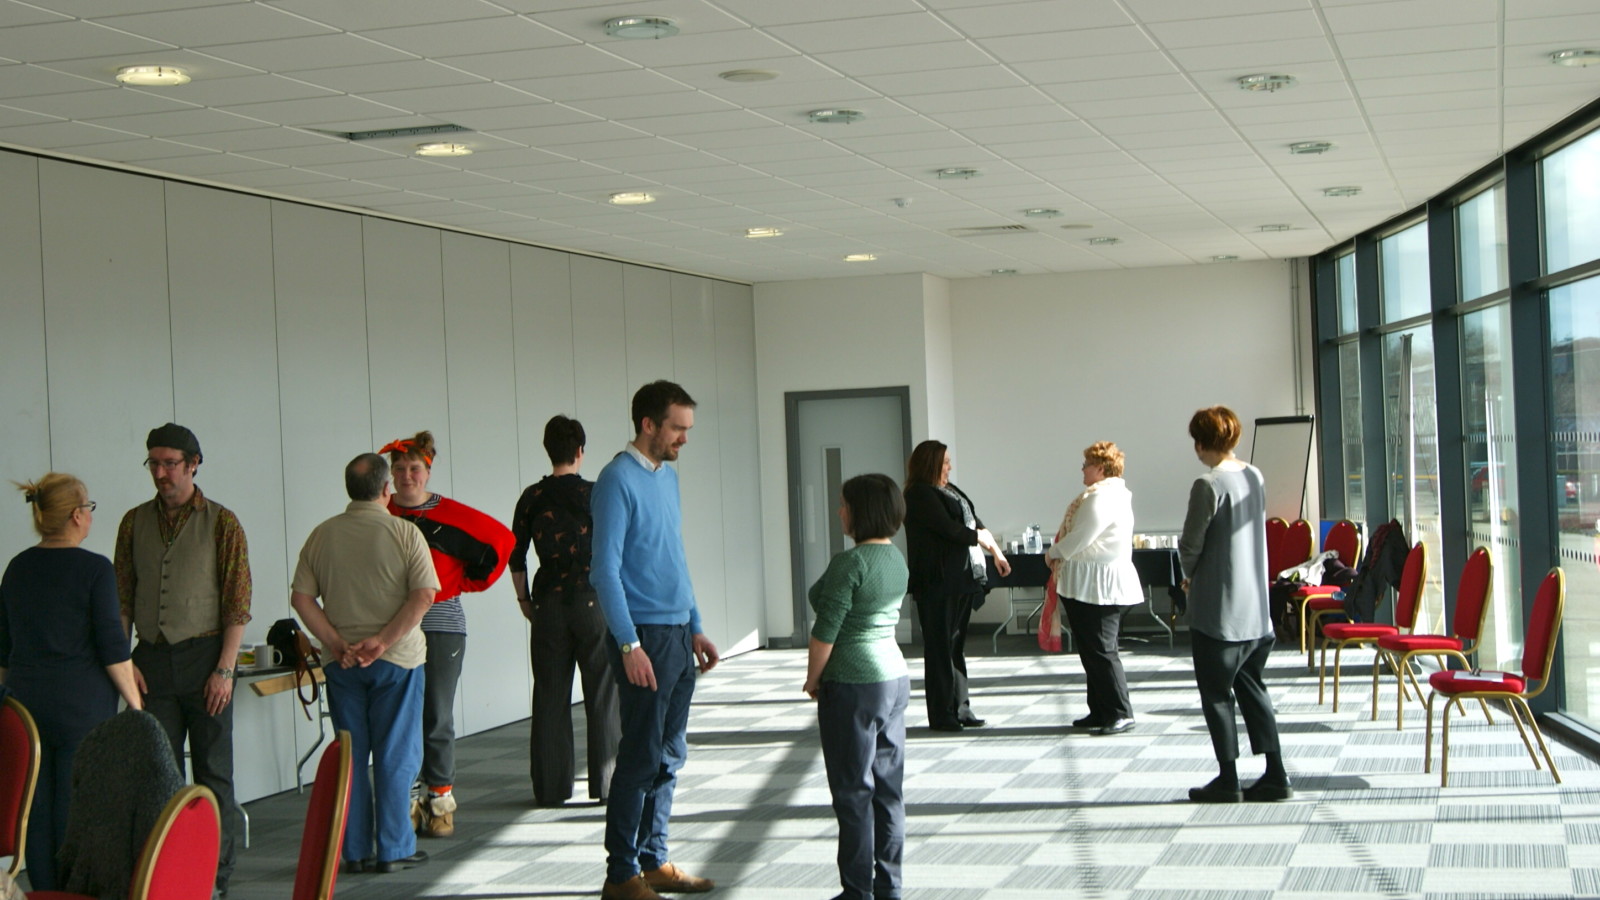 In a room lined all along one side with windows a number of people stand around the room in pairs. The pairs face each other standing around 1 meter apart.